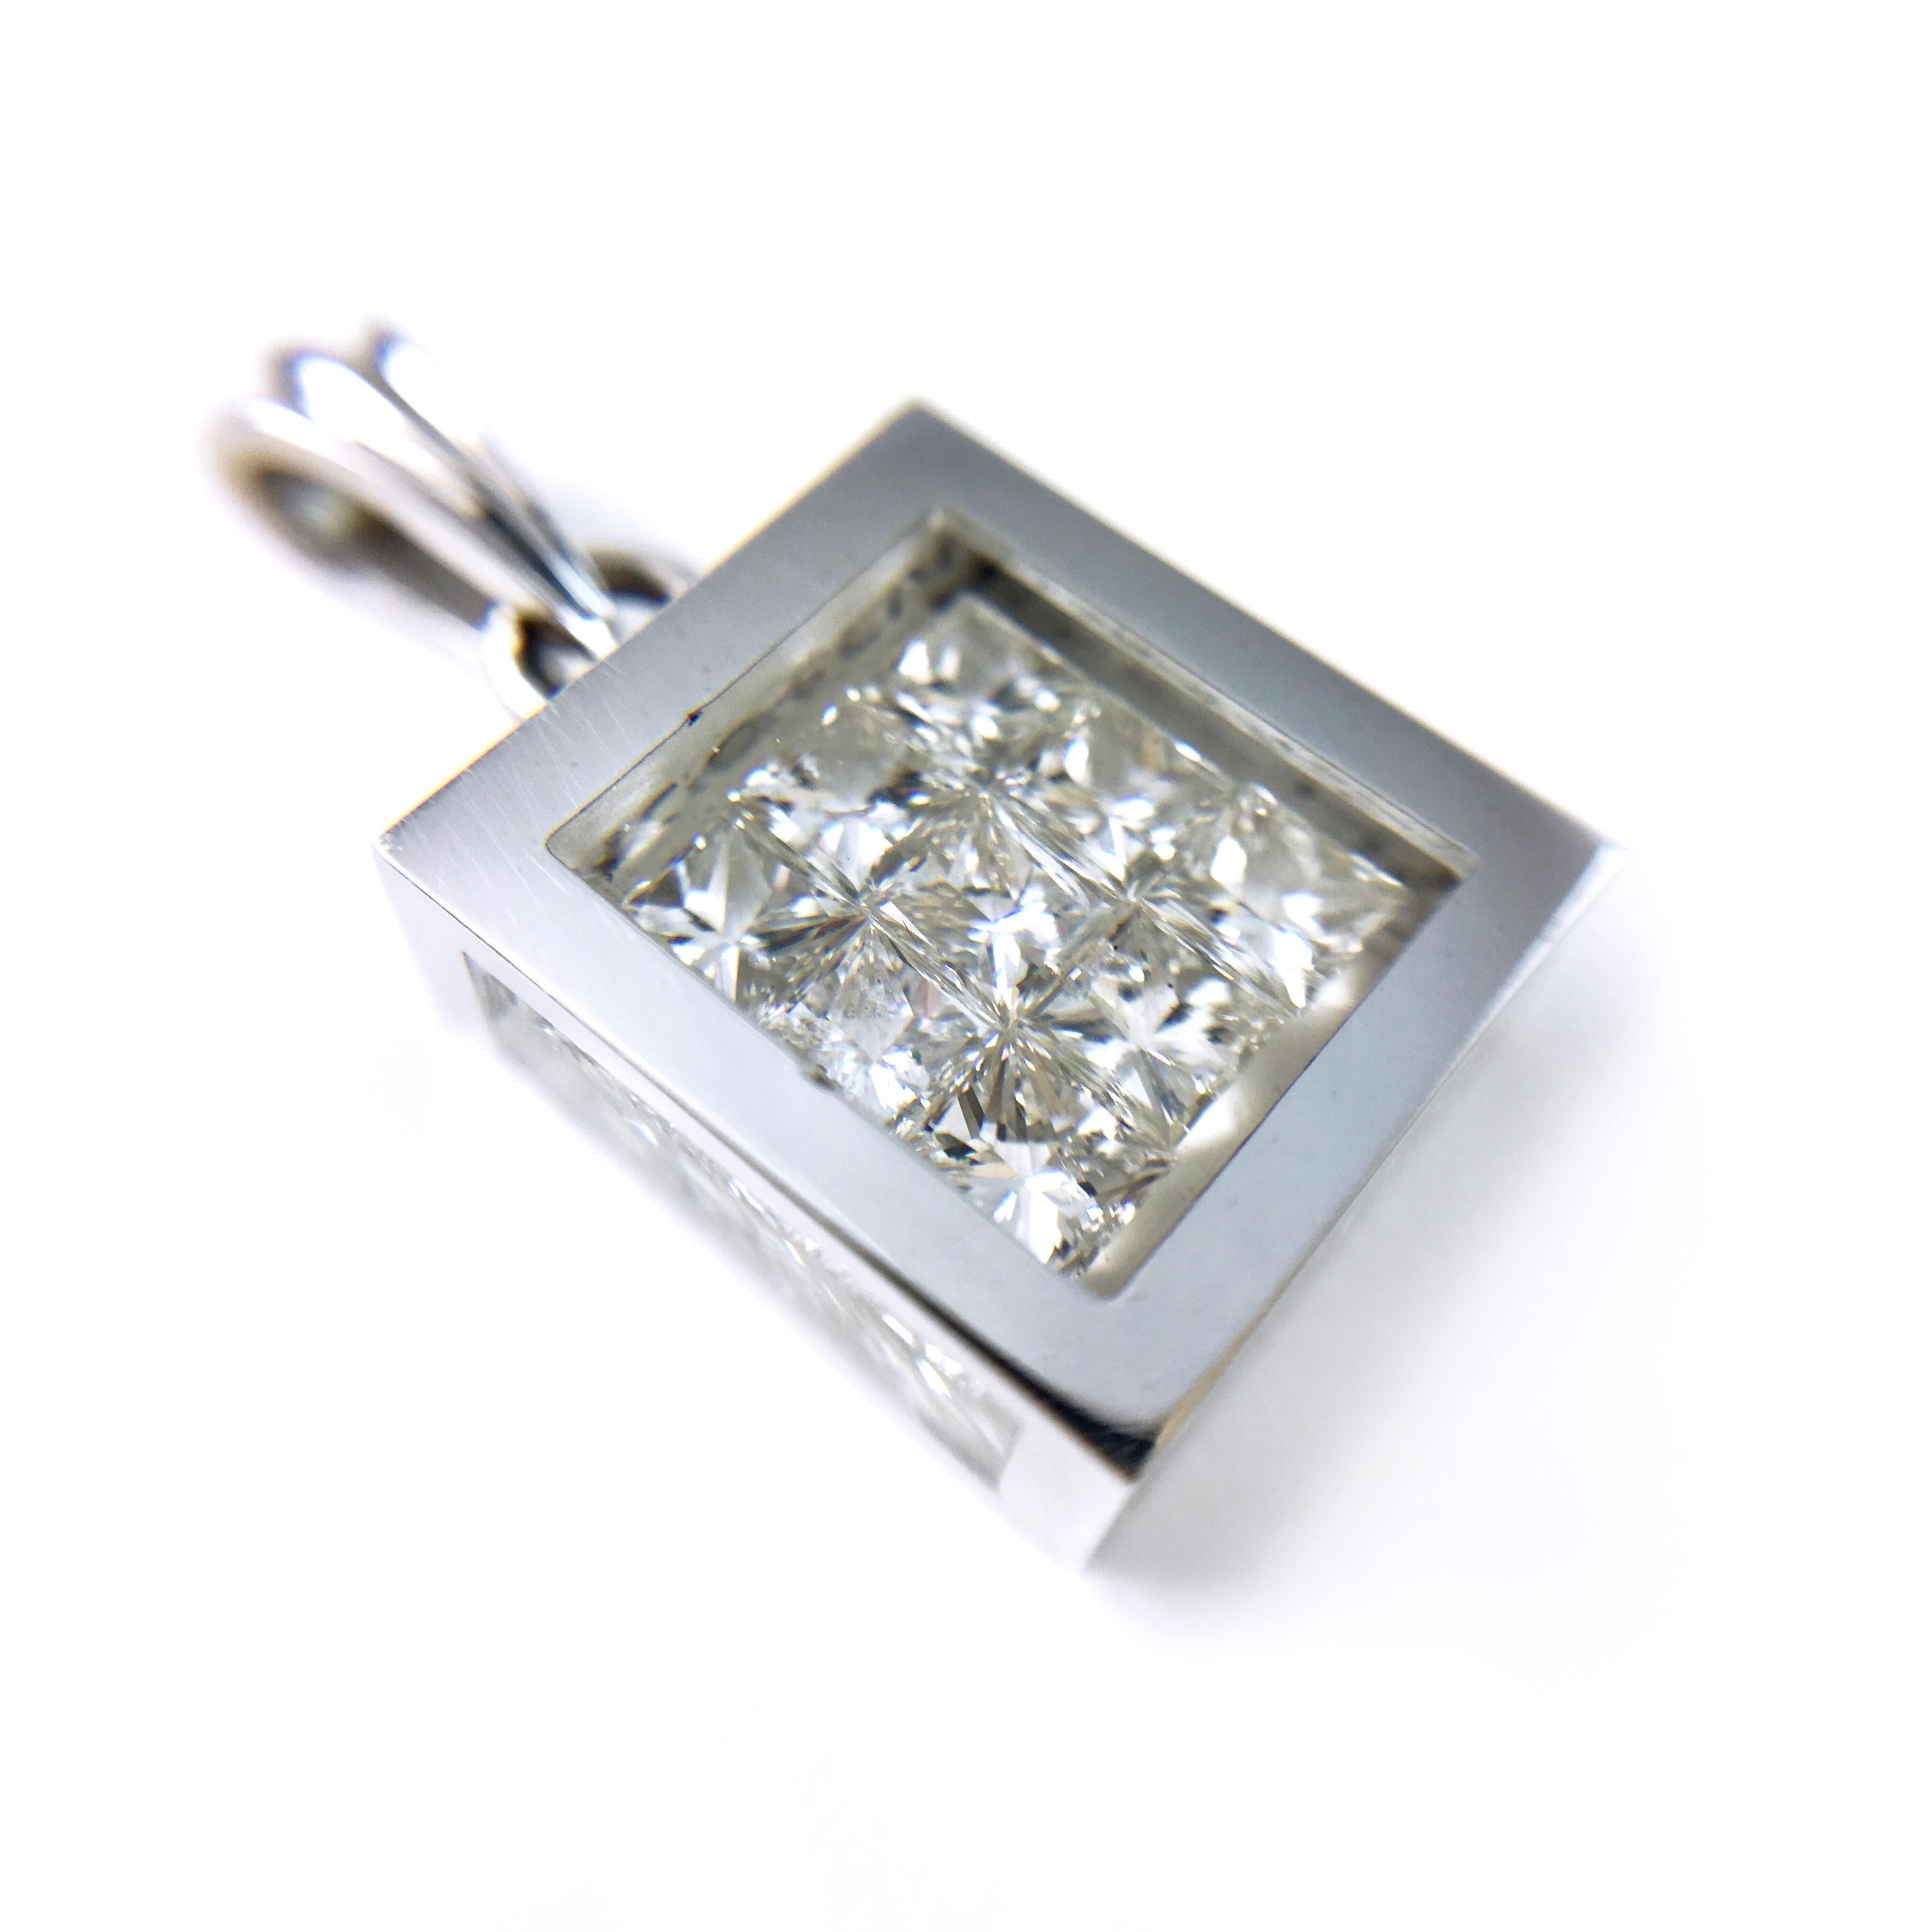 Incogem Floating Princess-Cut Diamond Pavé Pendant: 14K White Gold. The pendant is handcrafted of recycled 14k white gold. The nine diamonds are princess-cut, SI2 in clarity (G.I.A.), and G in color (G.I.A.). The total carat weight of the diamonds